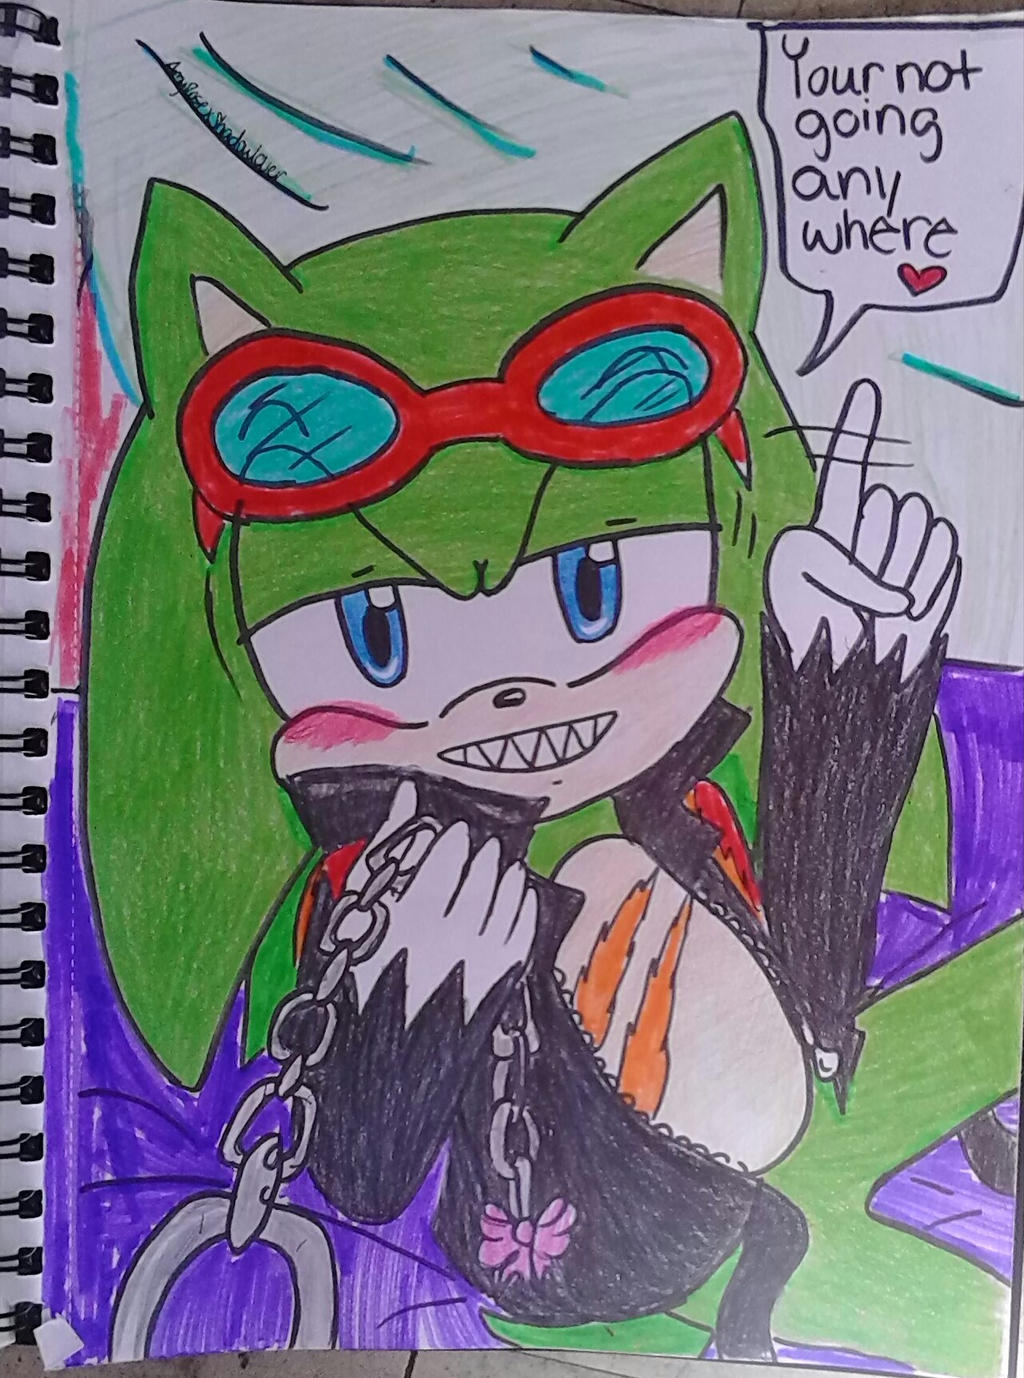 My Shadow x Scourge Ship Kid by FanGirlStephie on DeviantArt